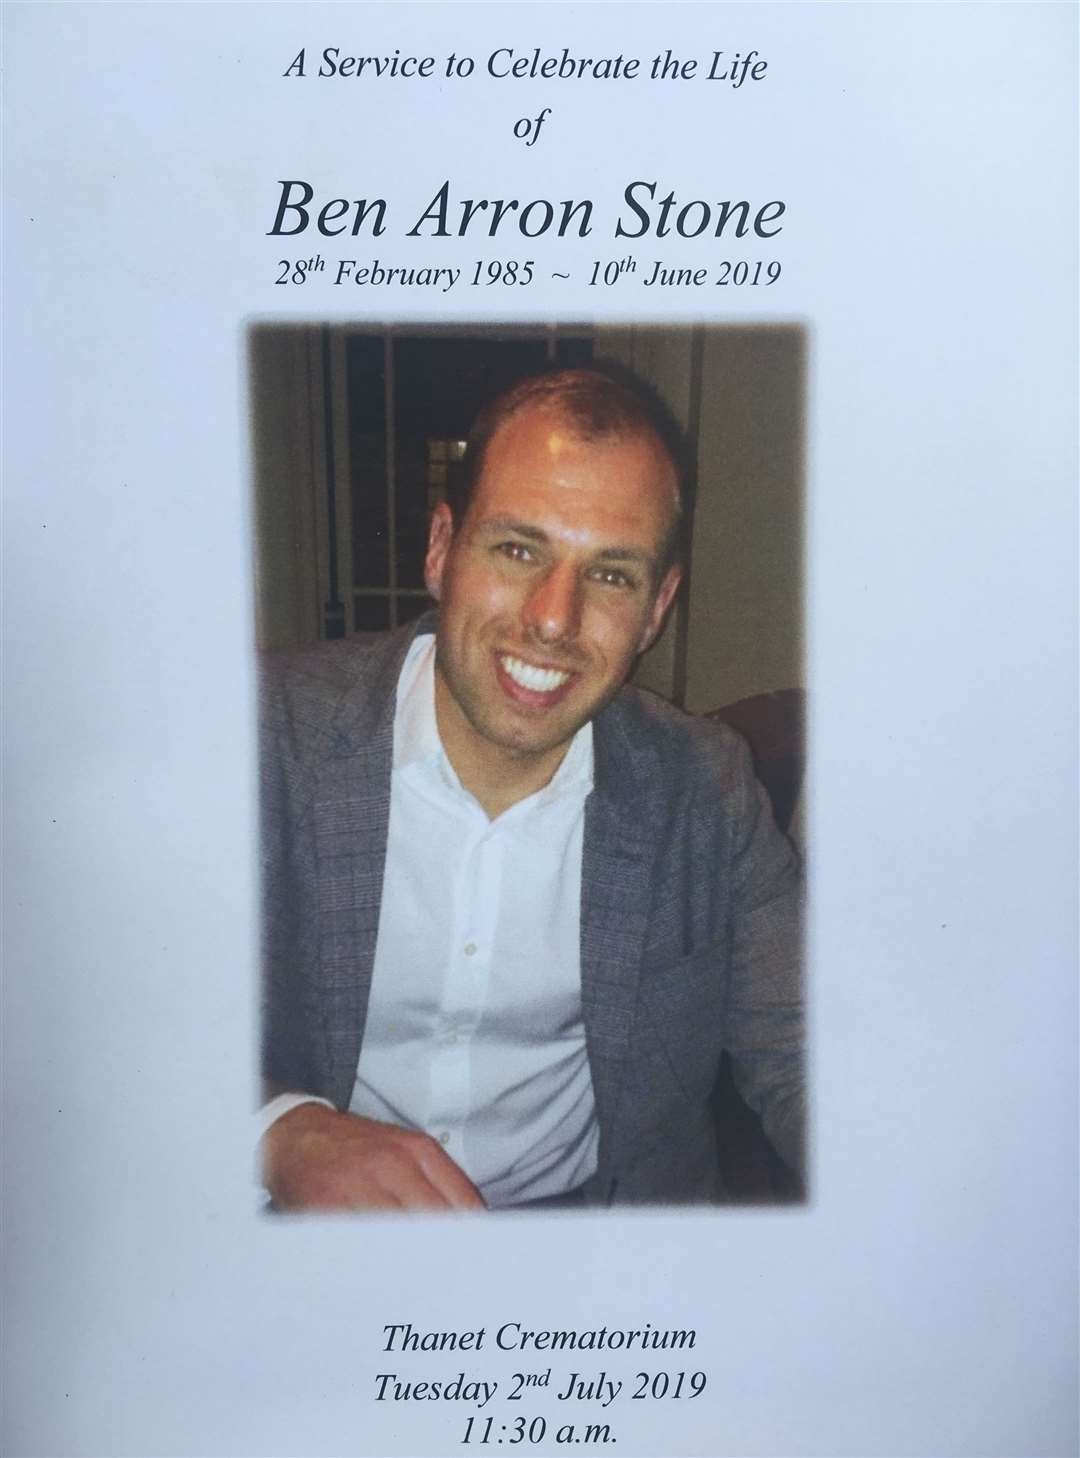 The funeral for Ben Stone was held at Thanet Crematorium, Margate